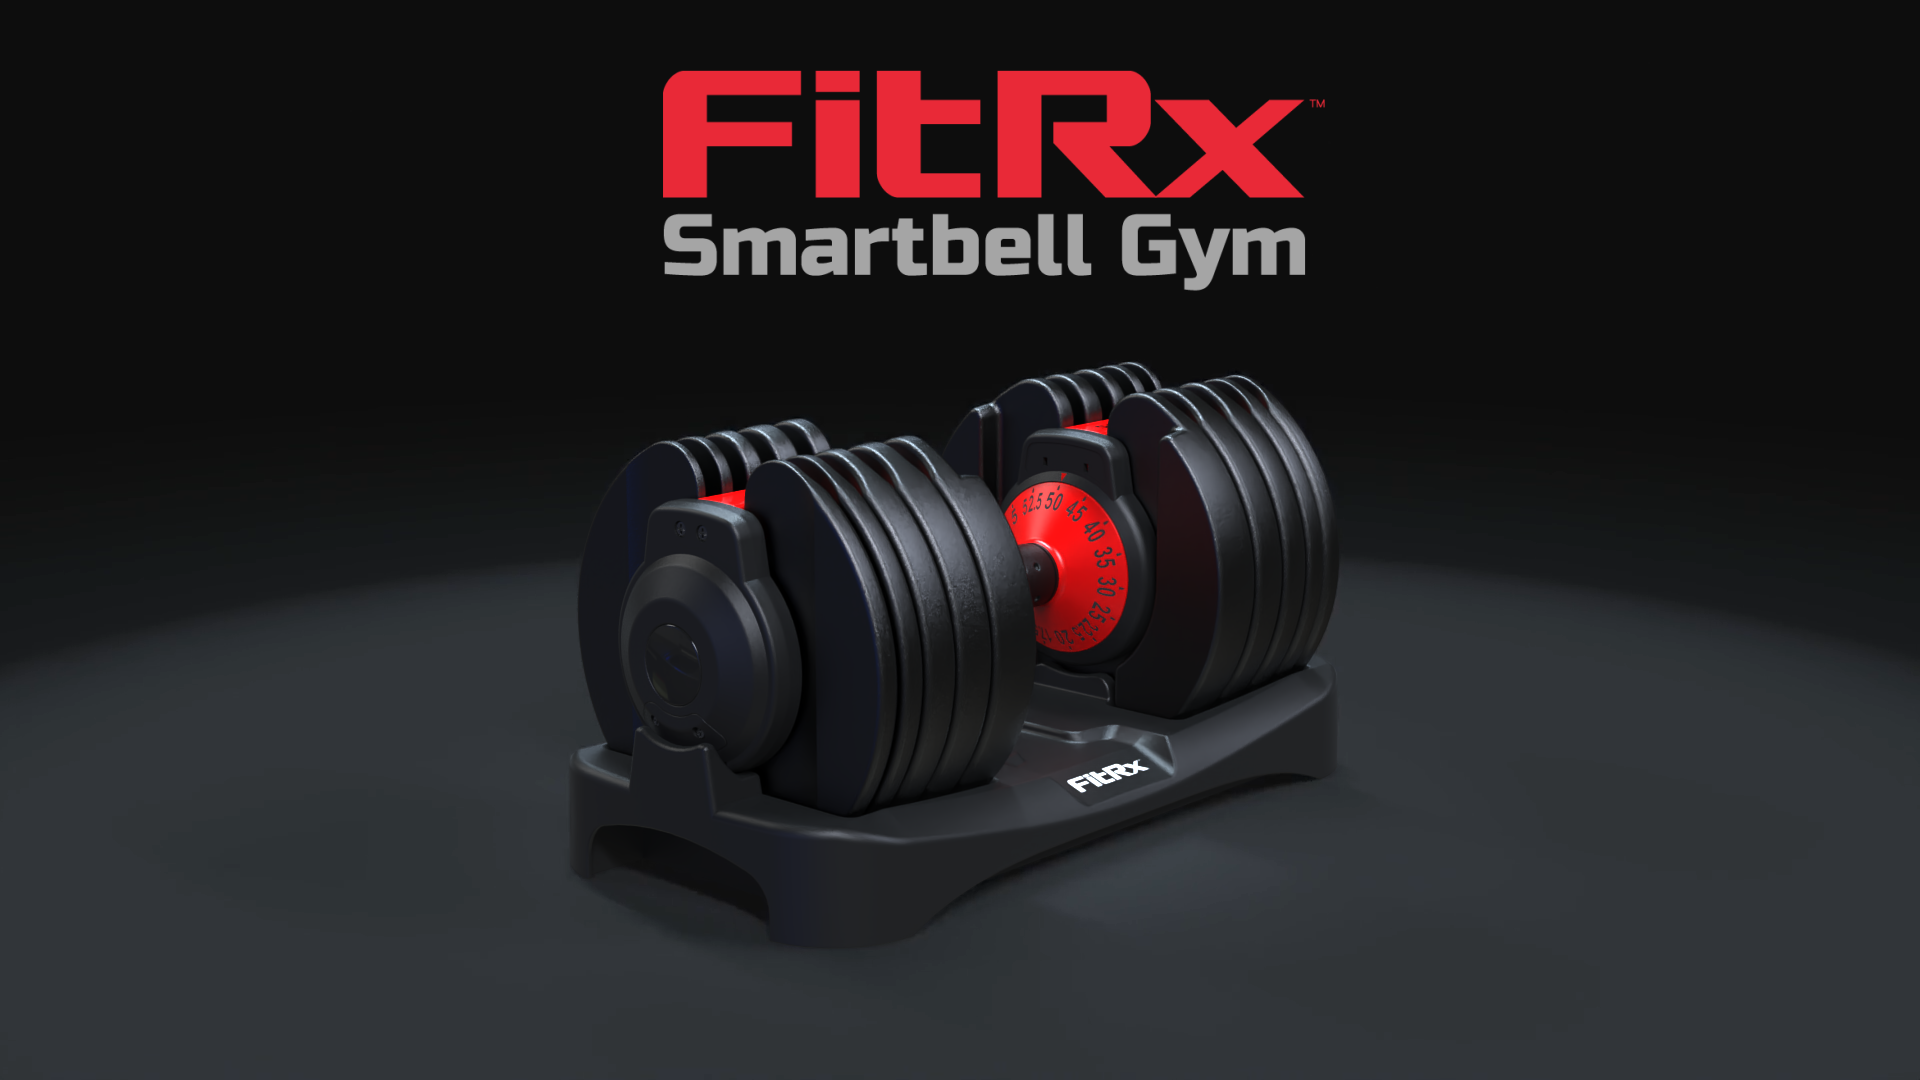 FitRx SmartBell Gym, 60 lbs. 4-in-1 Adjustable Interchangeable Dumbbell,  Barbell, and Kettlebell Weight Set, Black 